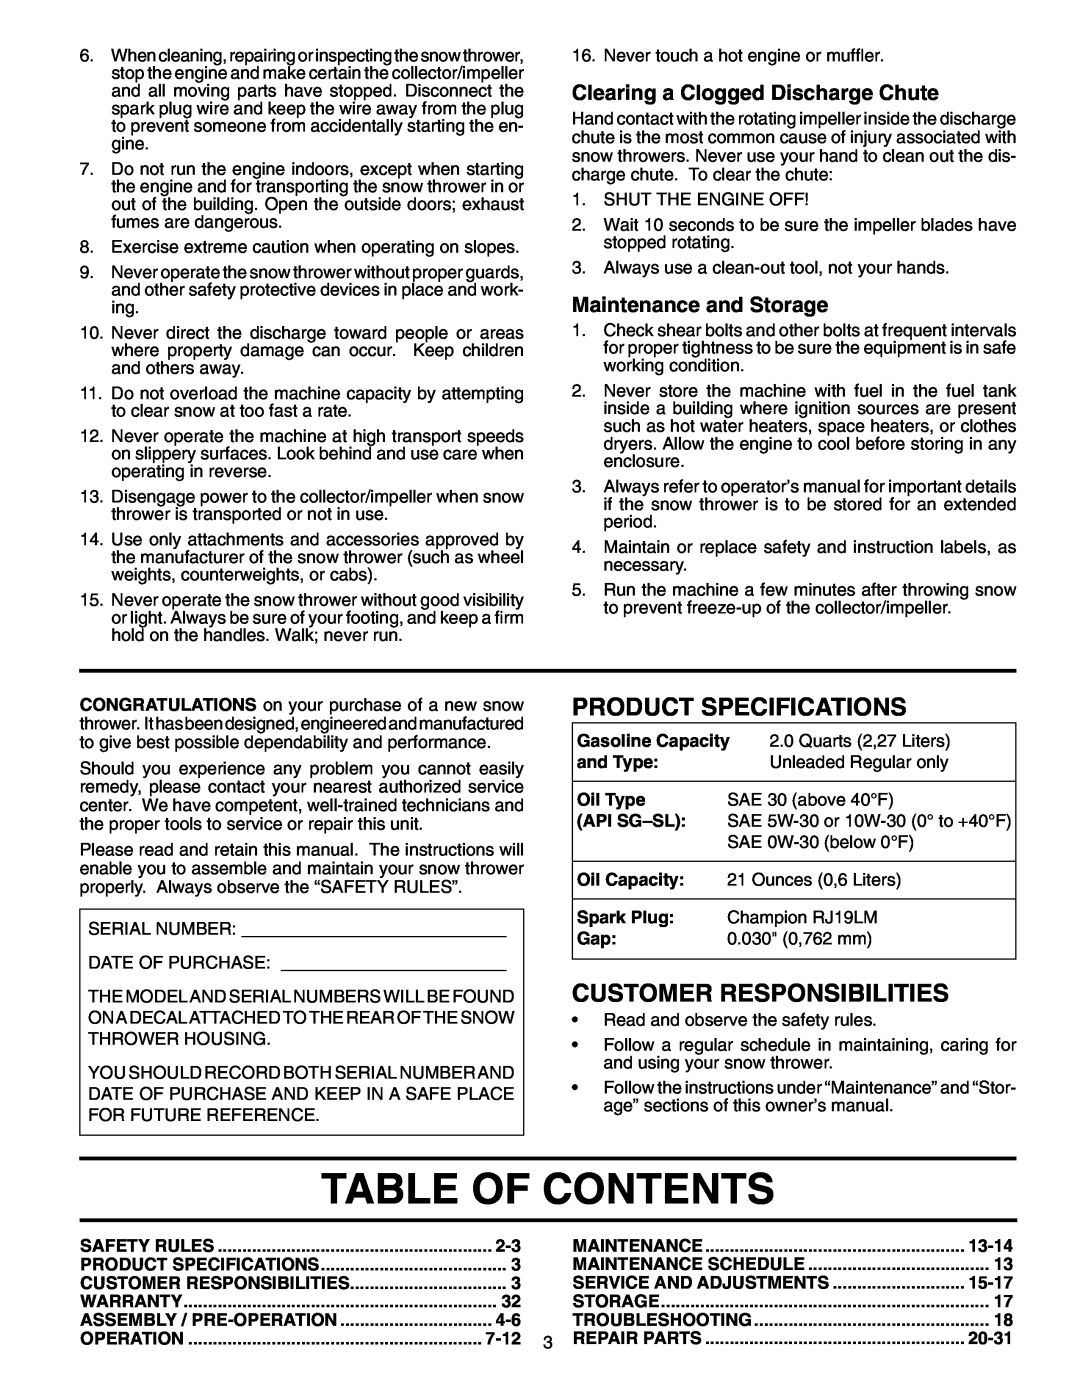 Poulan 199350 Table Of Contents, Clearing a Clogged Discharge Chute, Maintenance and Storage, Product Specifications, 7-12 